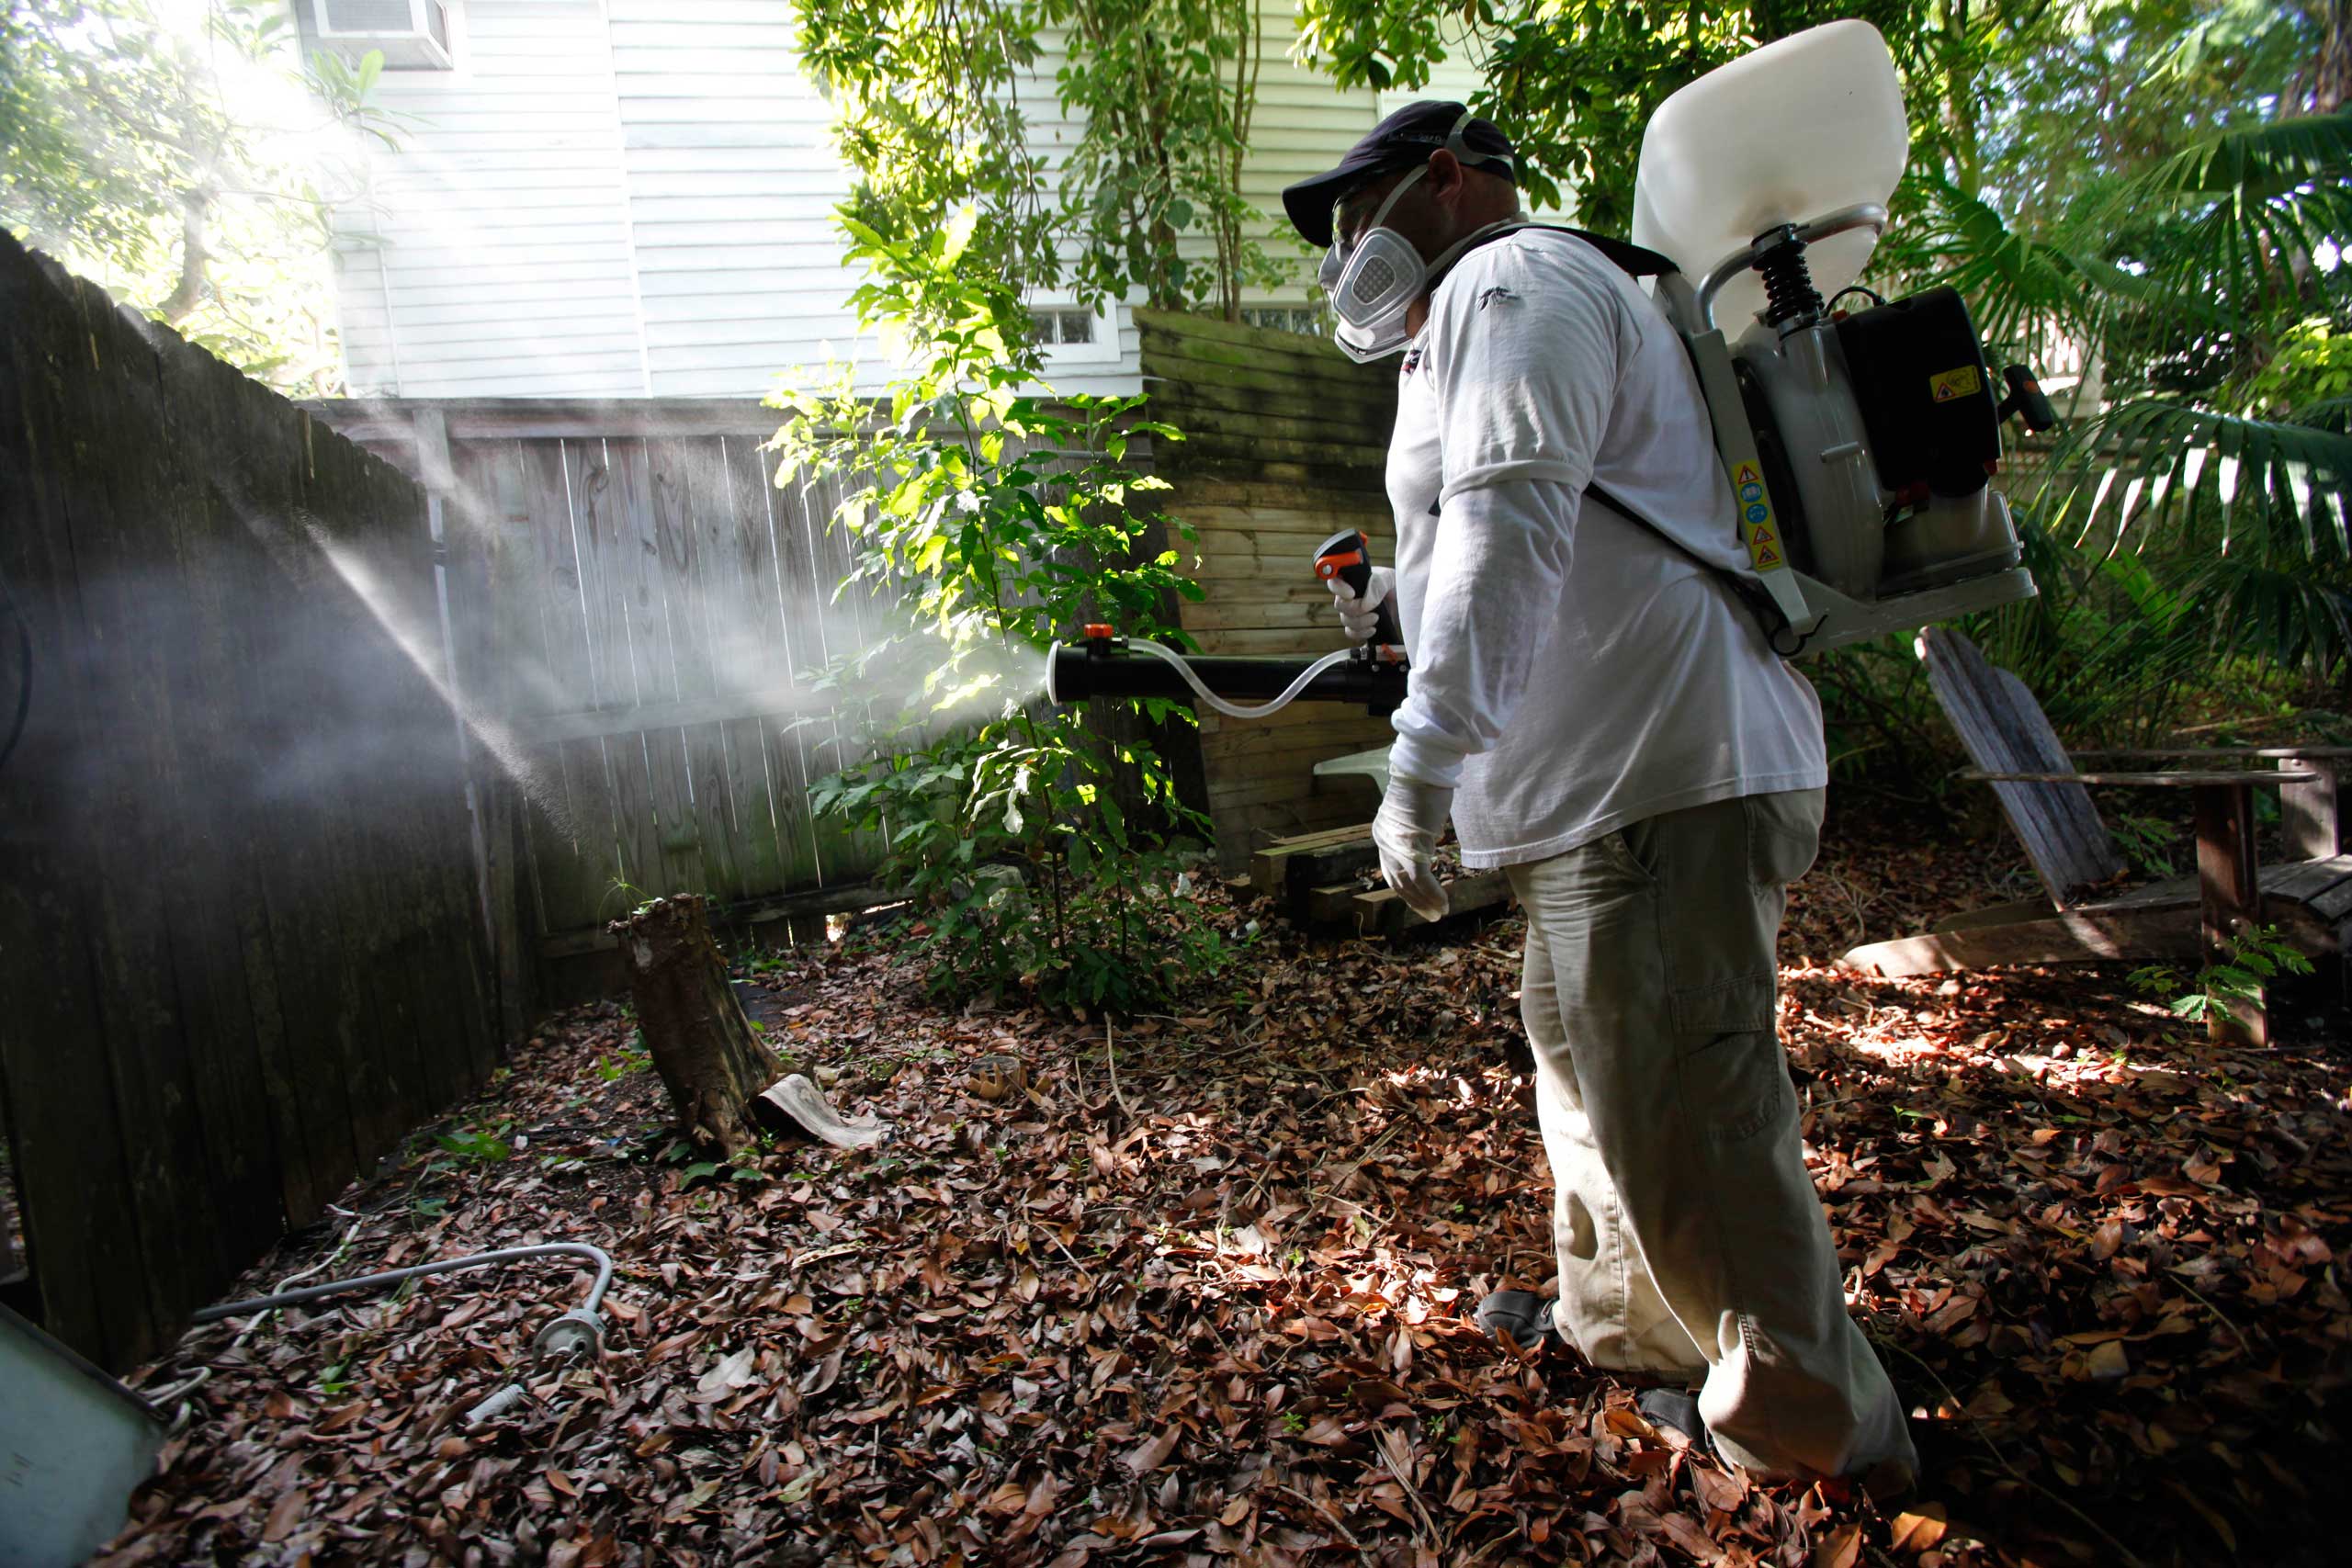 Jason Garcia, a field inspector with the Florida Keys Mosquito Control District, tests a sprayer that could be used in the future to spray pesticides to control mosquitos in Key West, Fla., on Oct. 4, 2012 (Wilfredo Lee—AP)